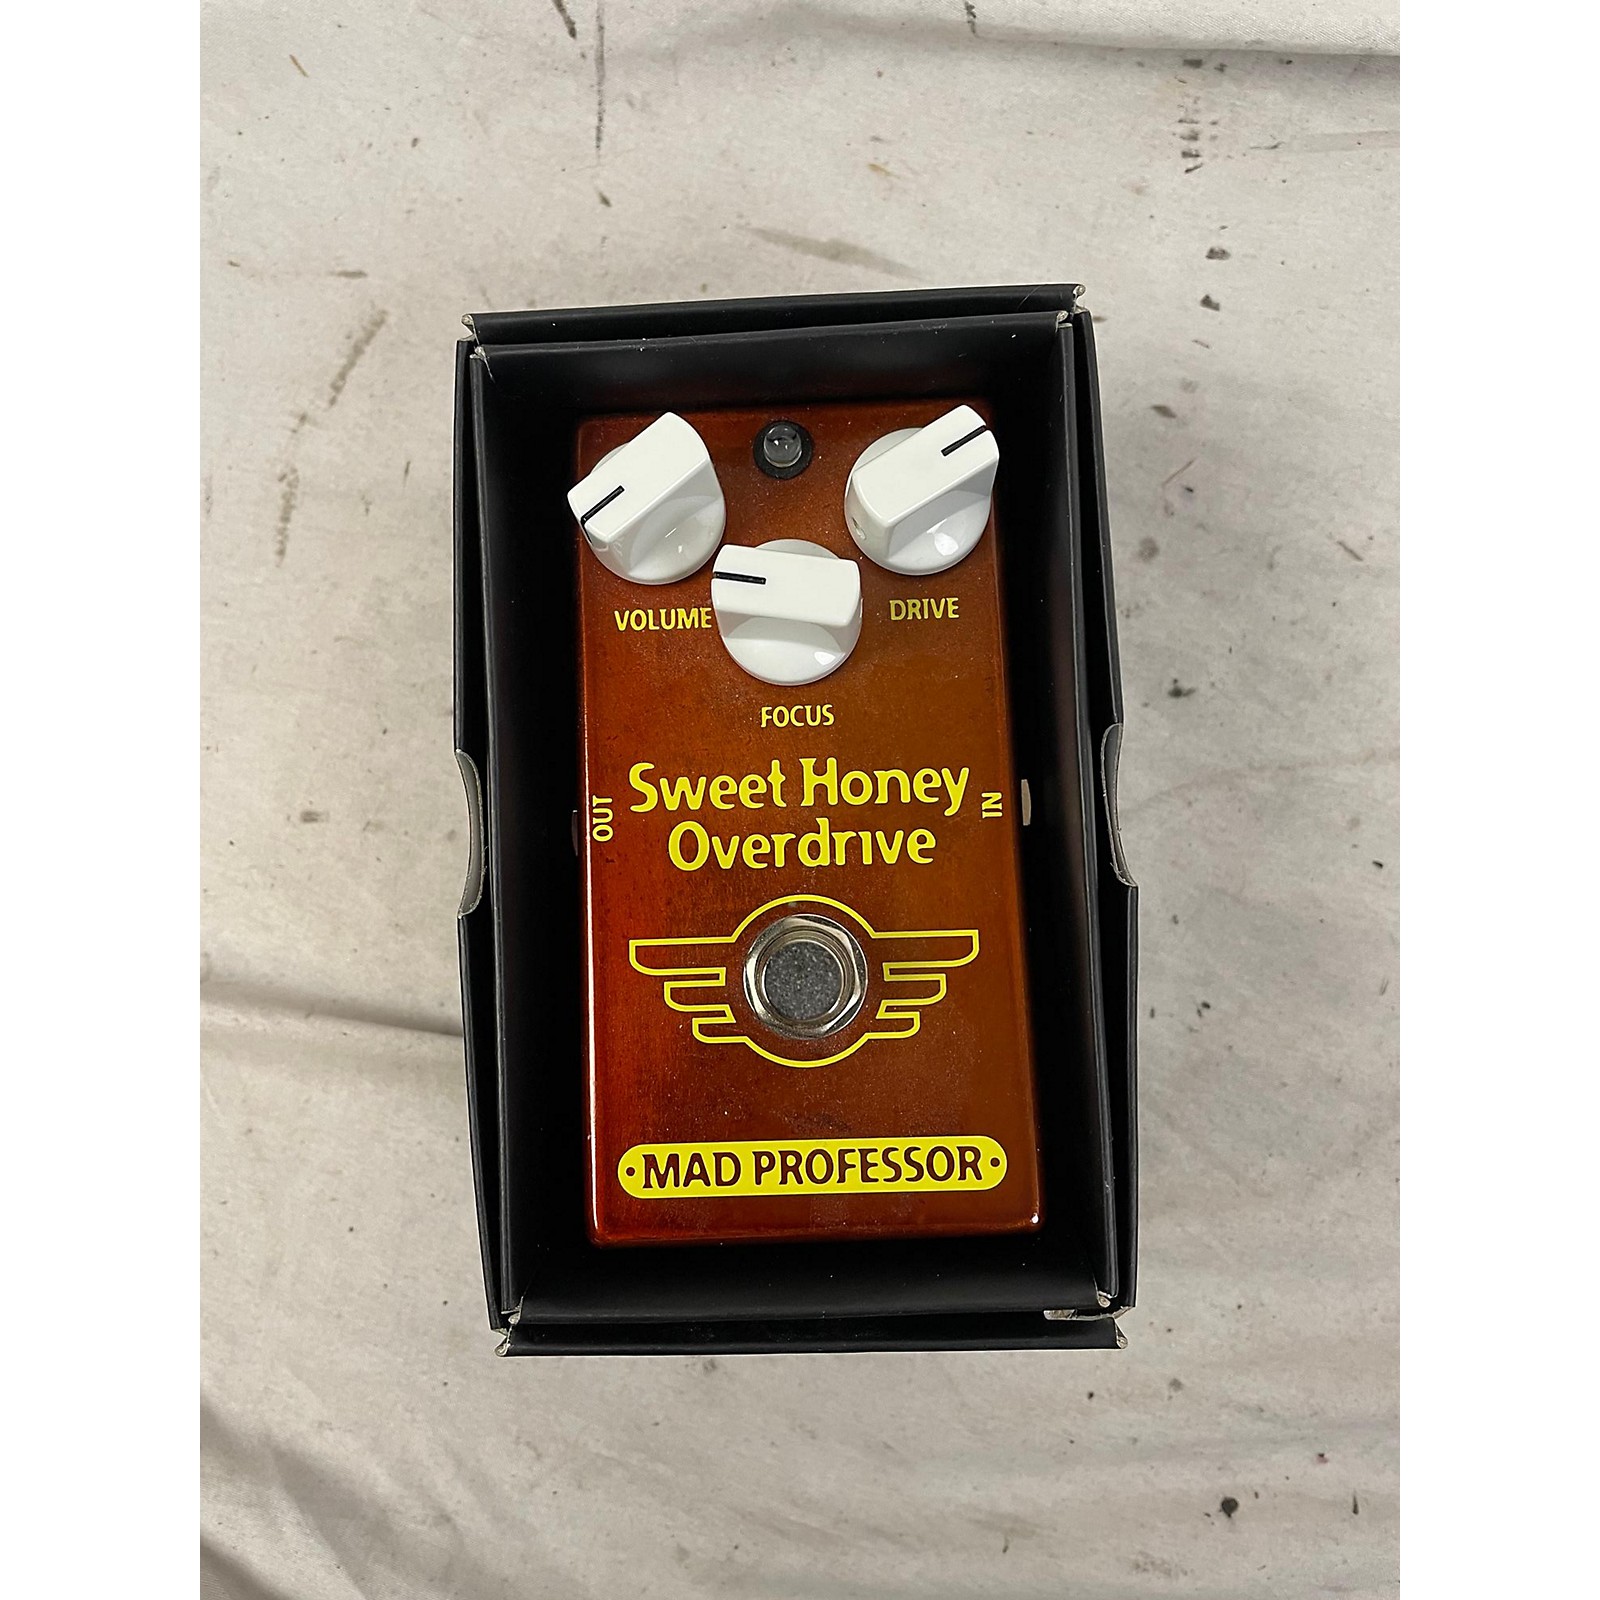 Guitar　Sweet　Pedal　Overdrive　Used　Effect　Honey　Mad　Professor　Center